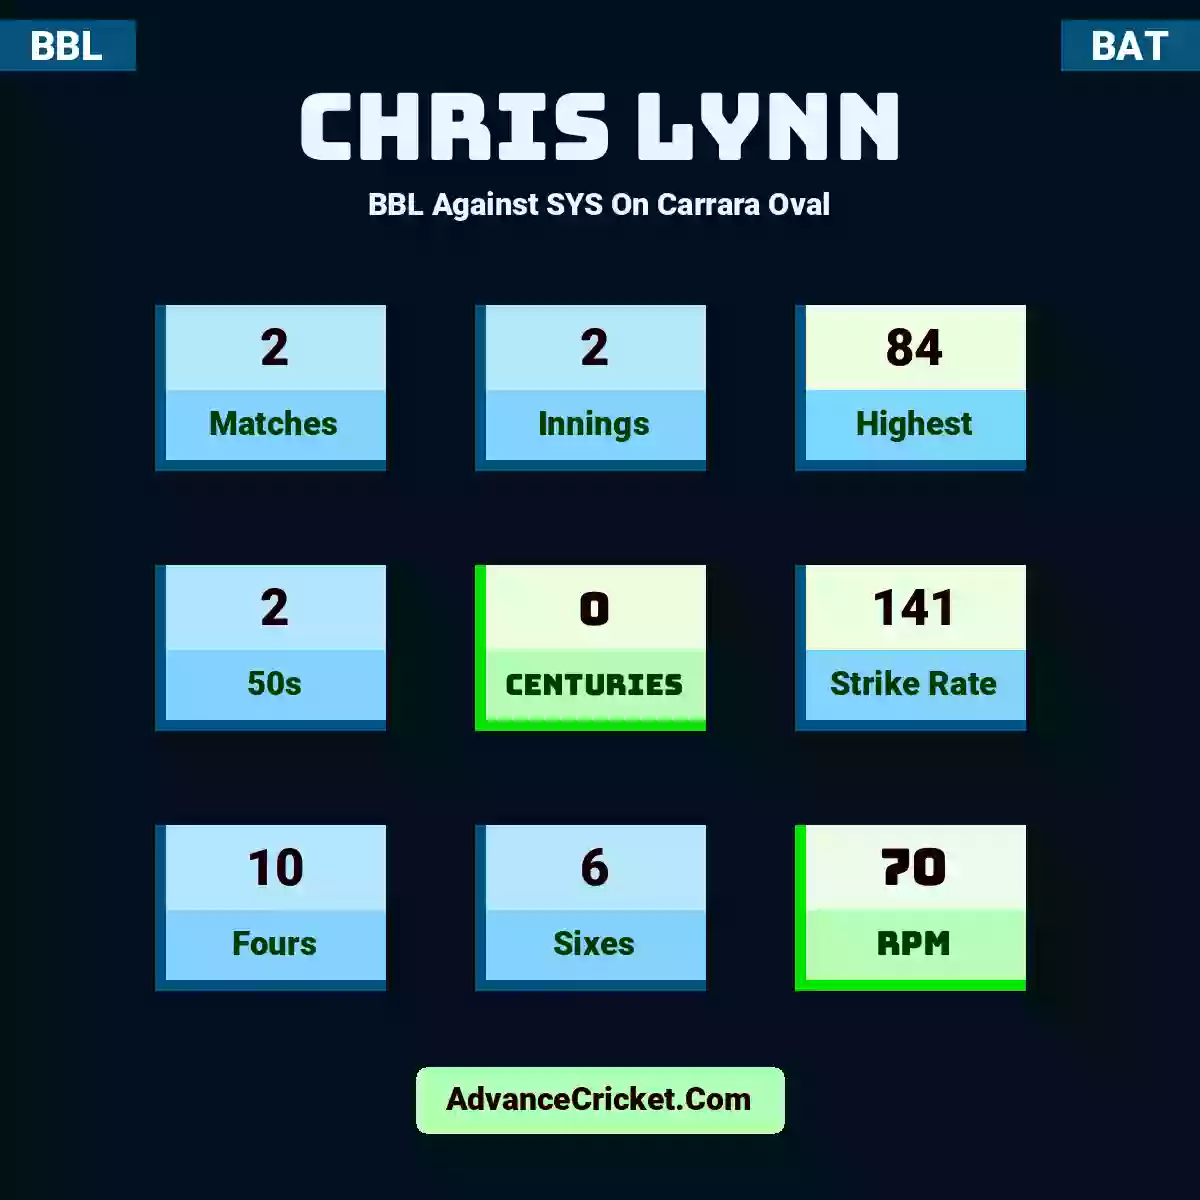 Chris Lynn BBL  Against SYS On Carrara Oval, Chris Lynn played 2 matches, scored 84 runs as highest, 2 half-centuries, and 0 centuries, with a strike rate of 141. C.Lynn hit 10 fours and 6 sixes, with an RPM of 70.